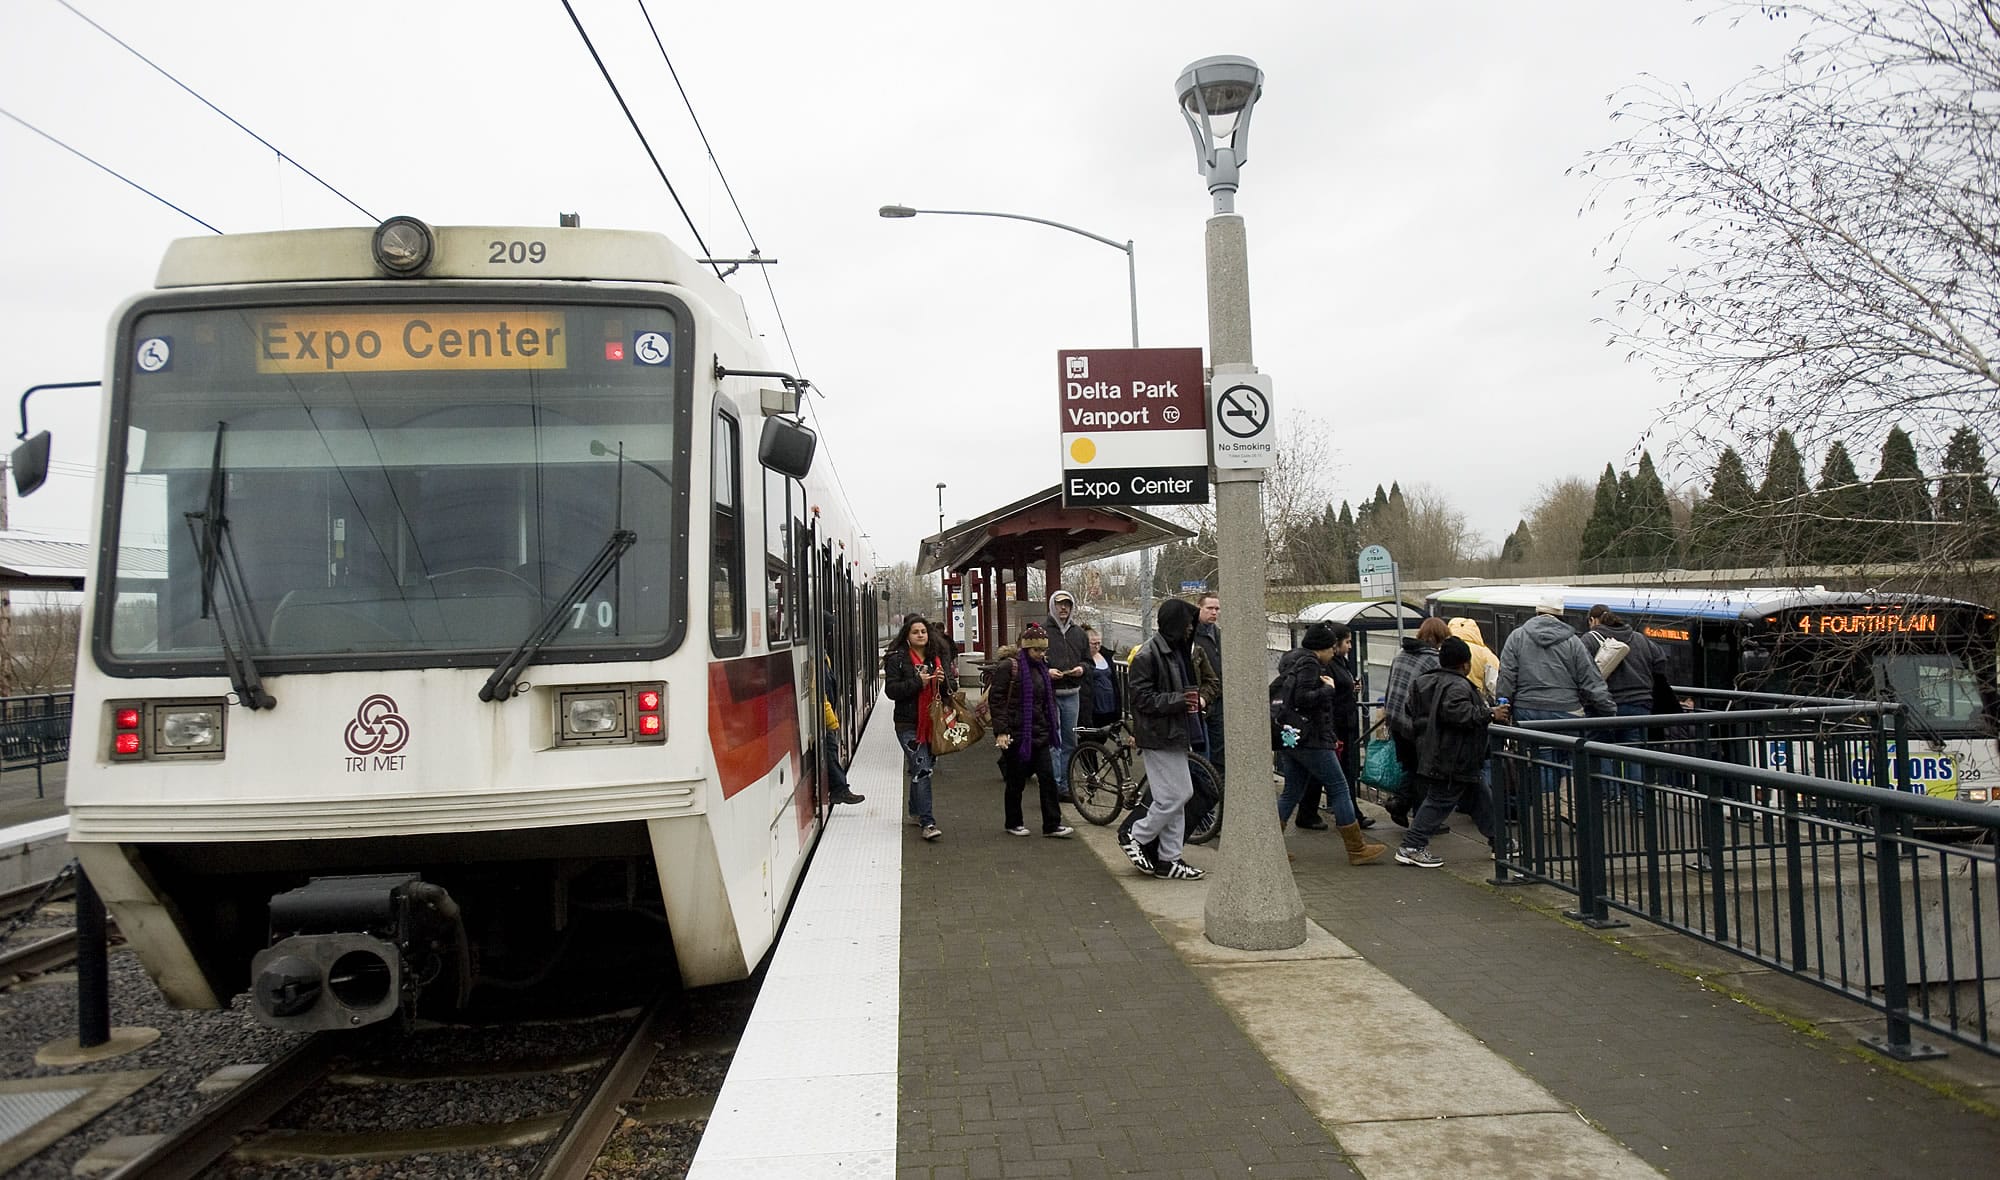 A group of residents who oppose extending light rail into Vancouver filed a lawsuit against the city on Thursday, arguing the city council overstepped its authority when it voted to not place a proposed initiative on the November ballot.